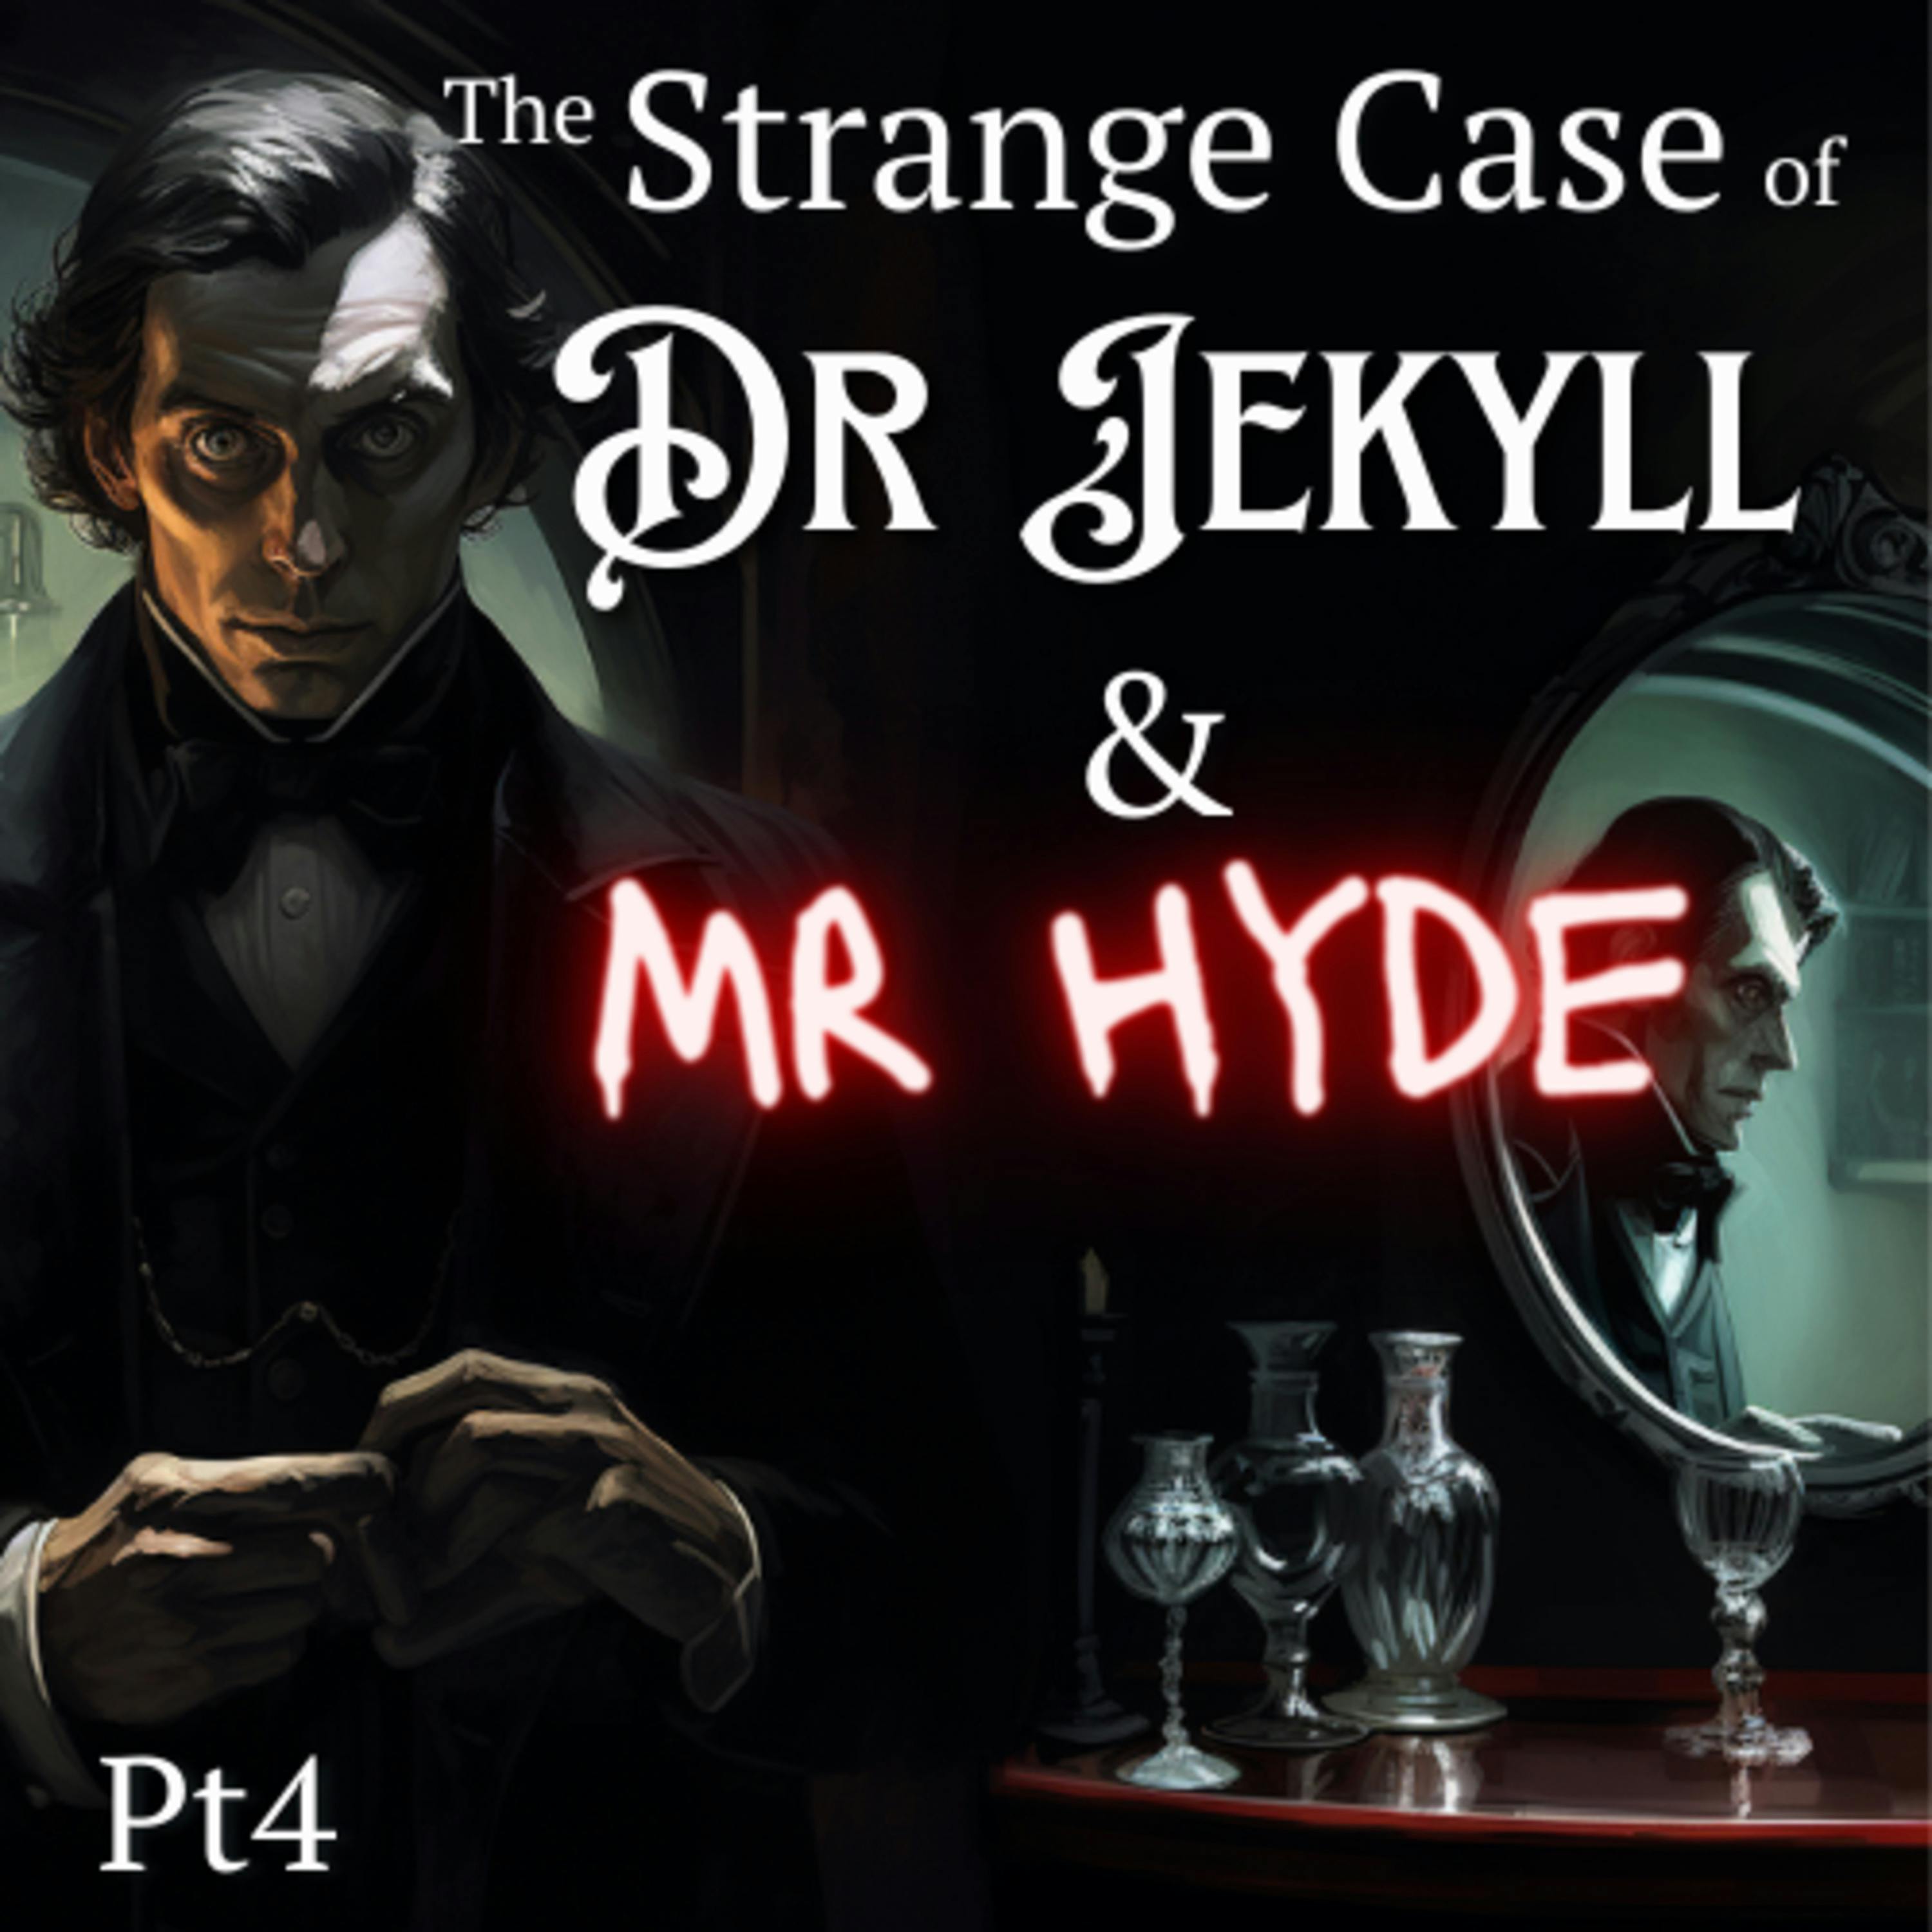 The Strange Case of Dr Jekyll and Mr Hyde Part 4